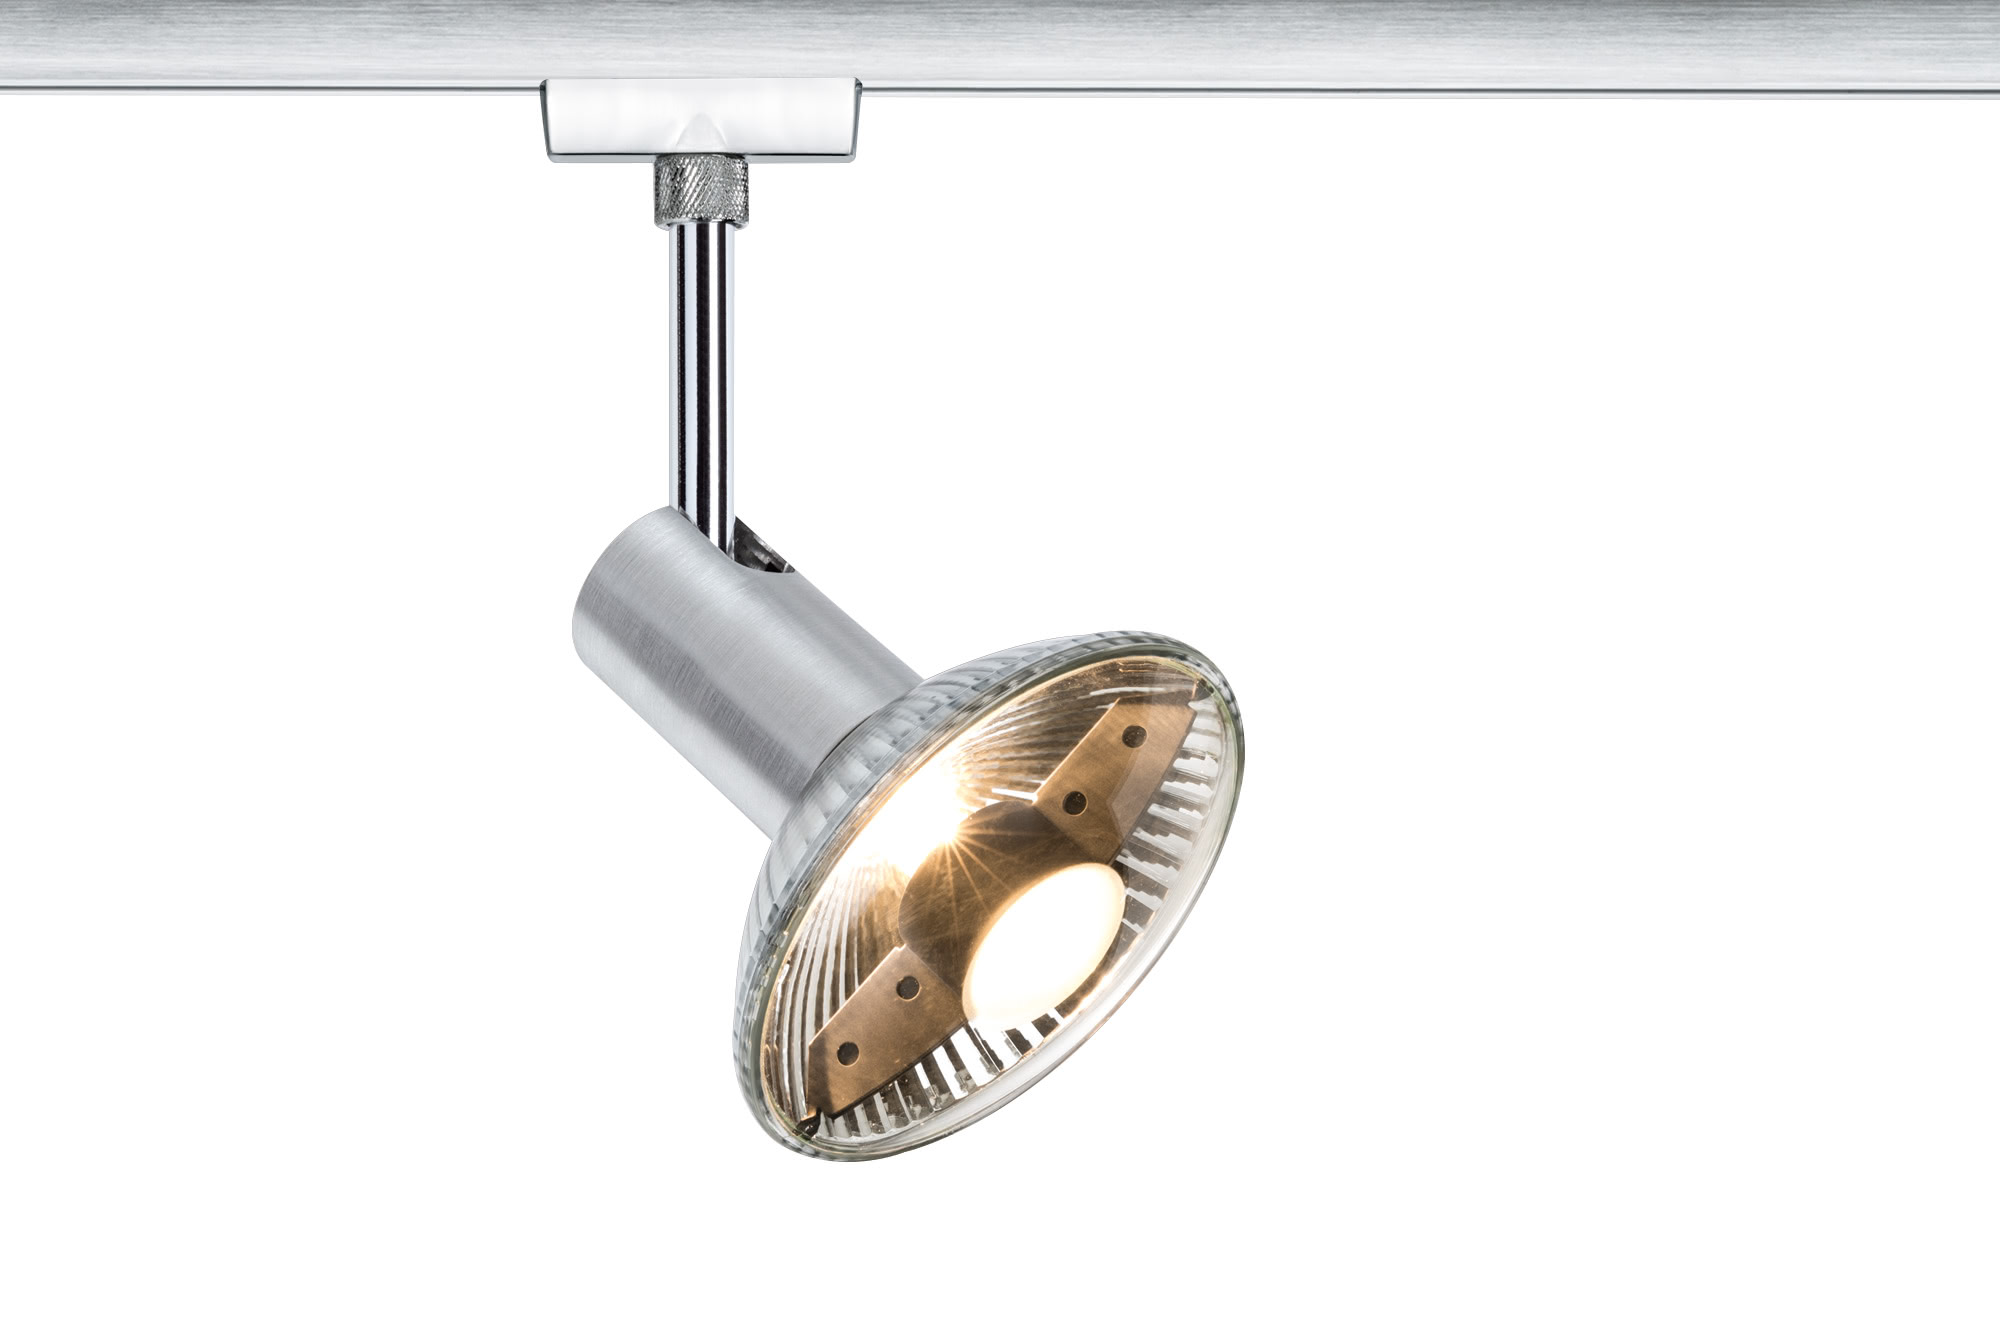 95152 Св-к ProRail Barelli max.75W GZ10 Al-g The minimalist VariLine Spot Allegro can be combined with a GU10 lamp of your choice with a max. output of 75W. Create two separate illumination scenarios in one room with just one rail from the VariLine 2-phase rail system. 951.52 Paulmann